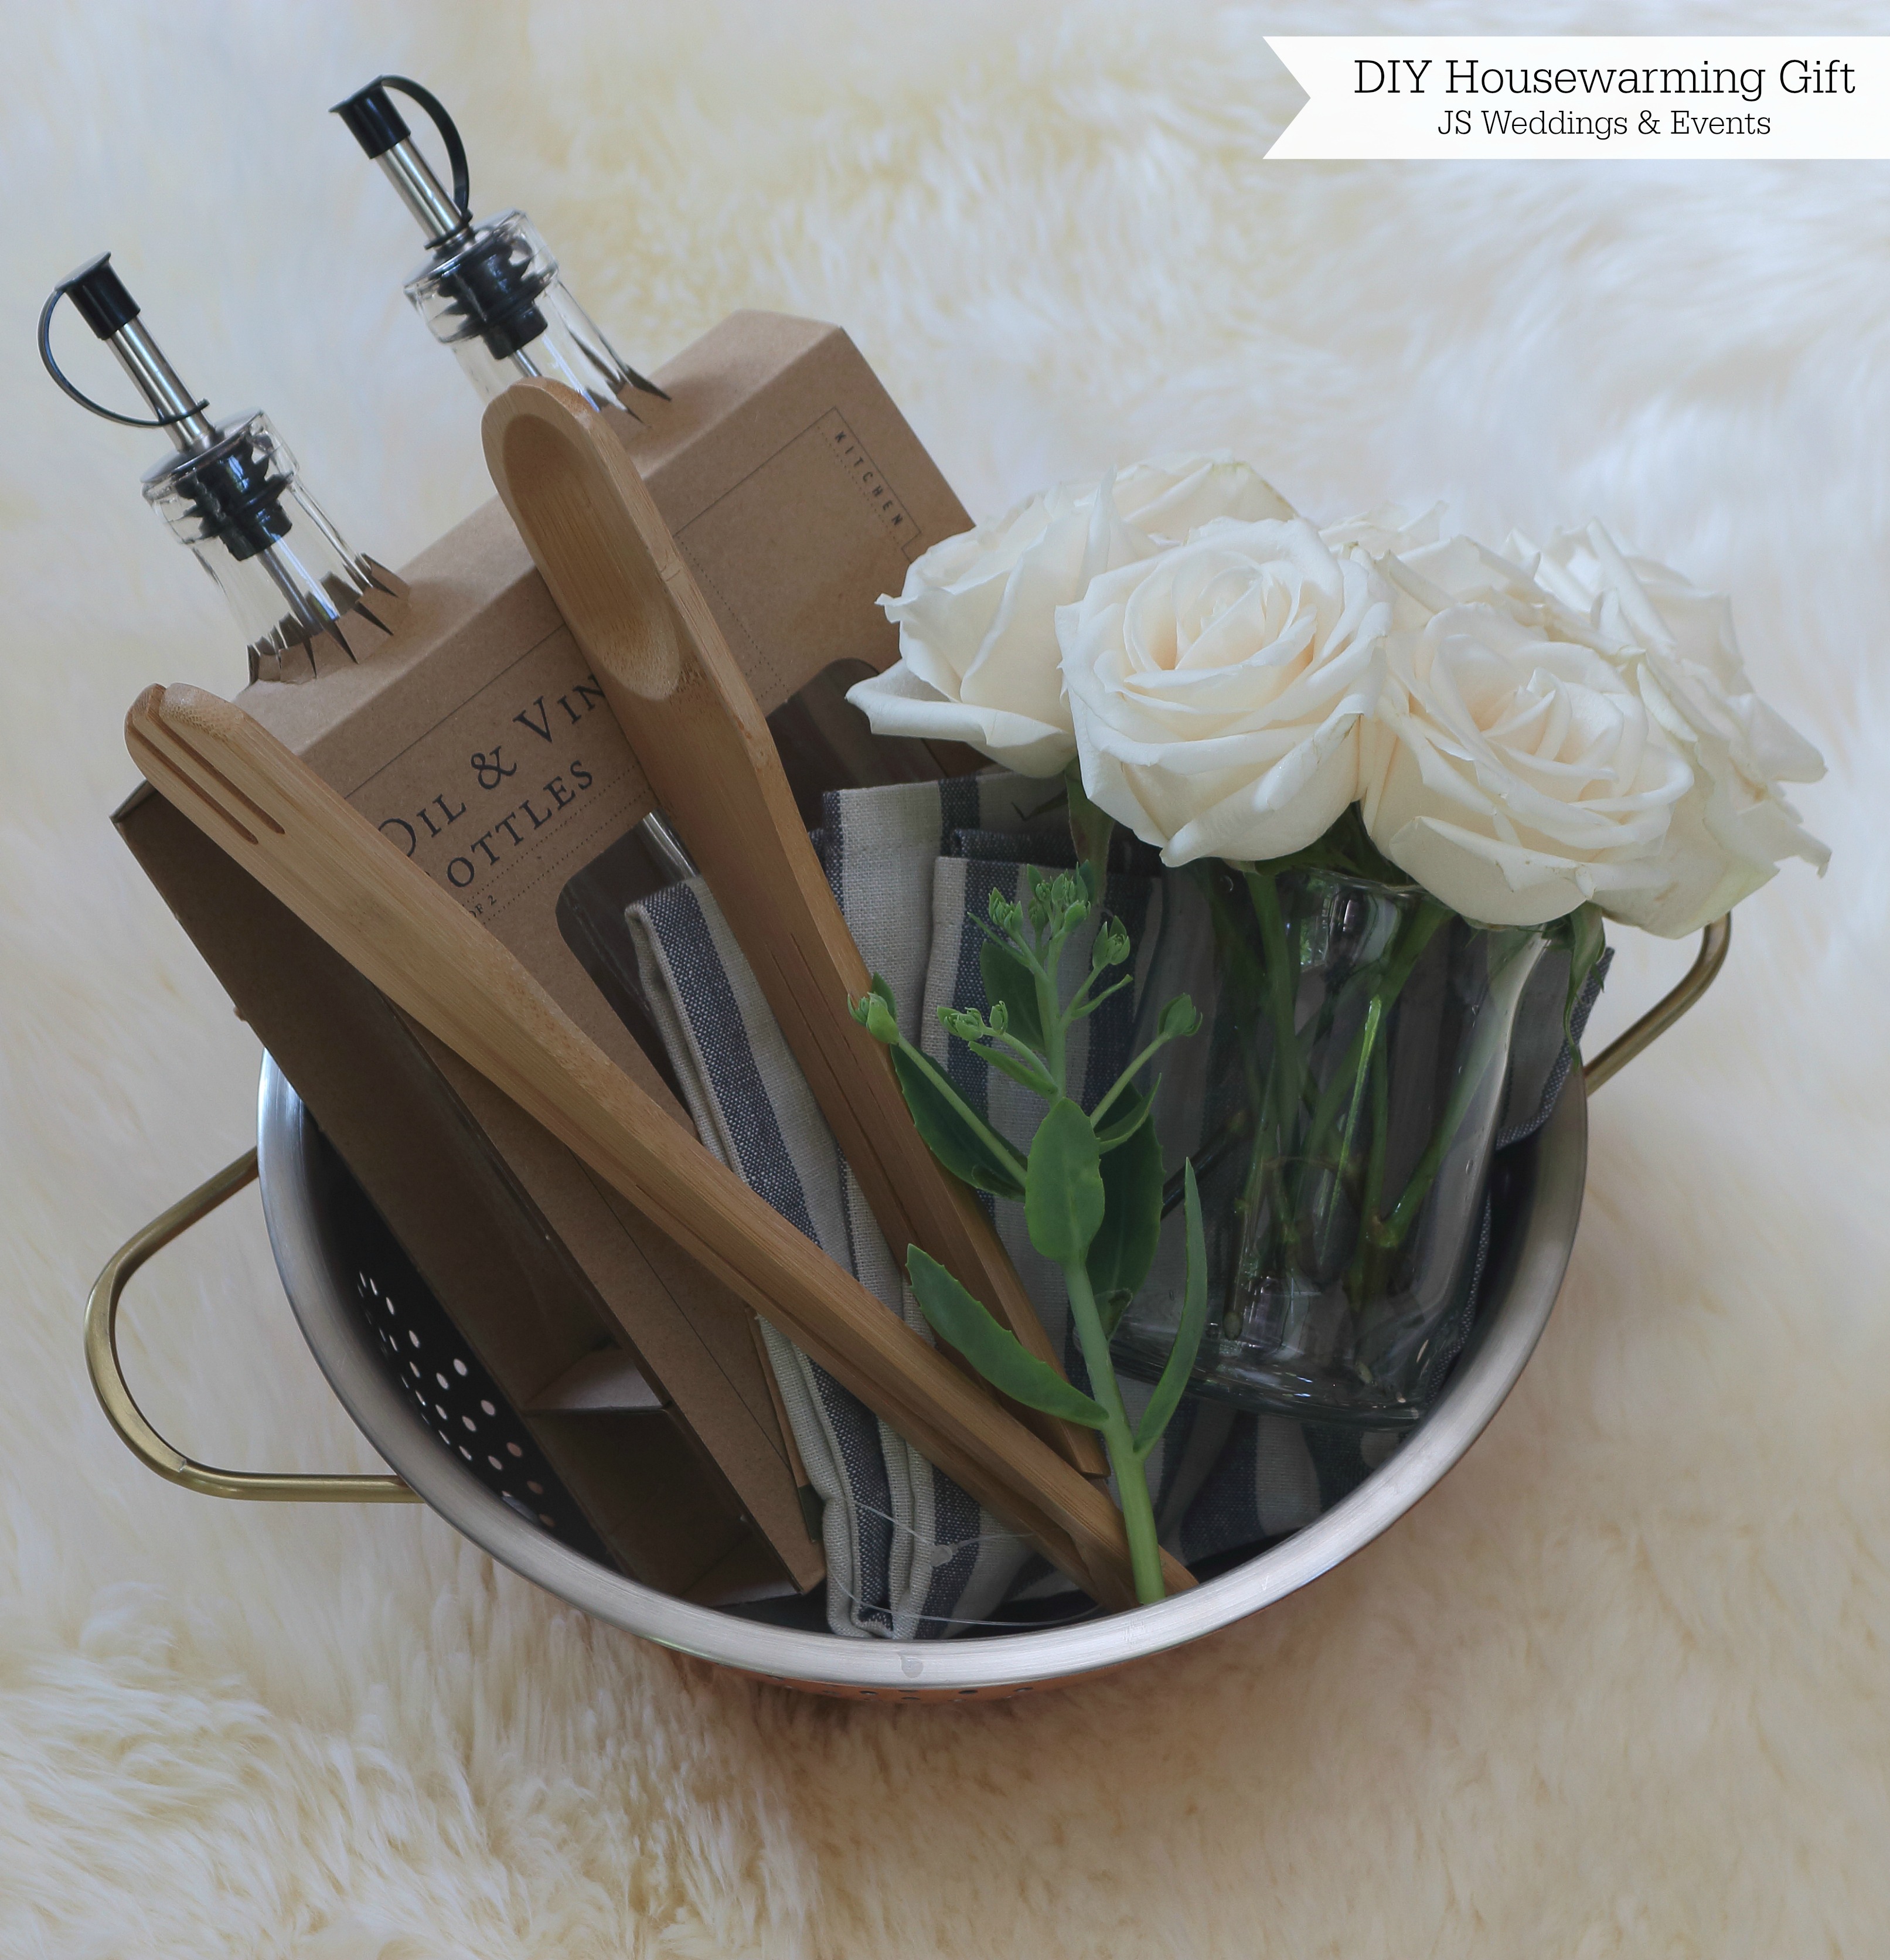 JS Weddings and Events, Grand Rapids Wedding Planner and Floral Designer - DIY Housewarming Gift, Newlywed Wedding Gift